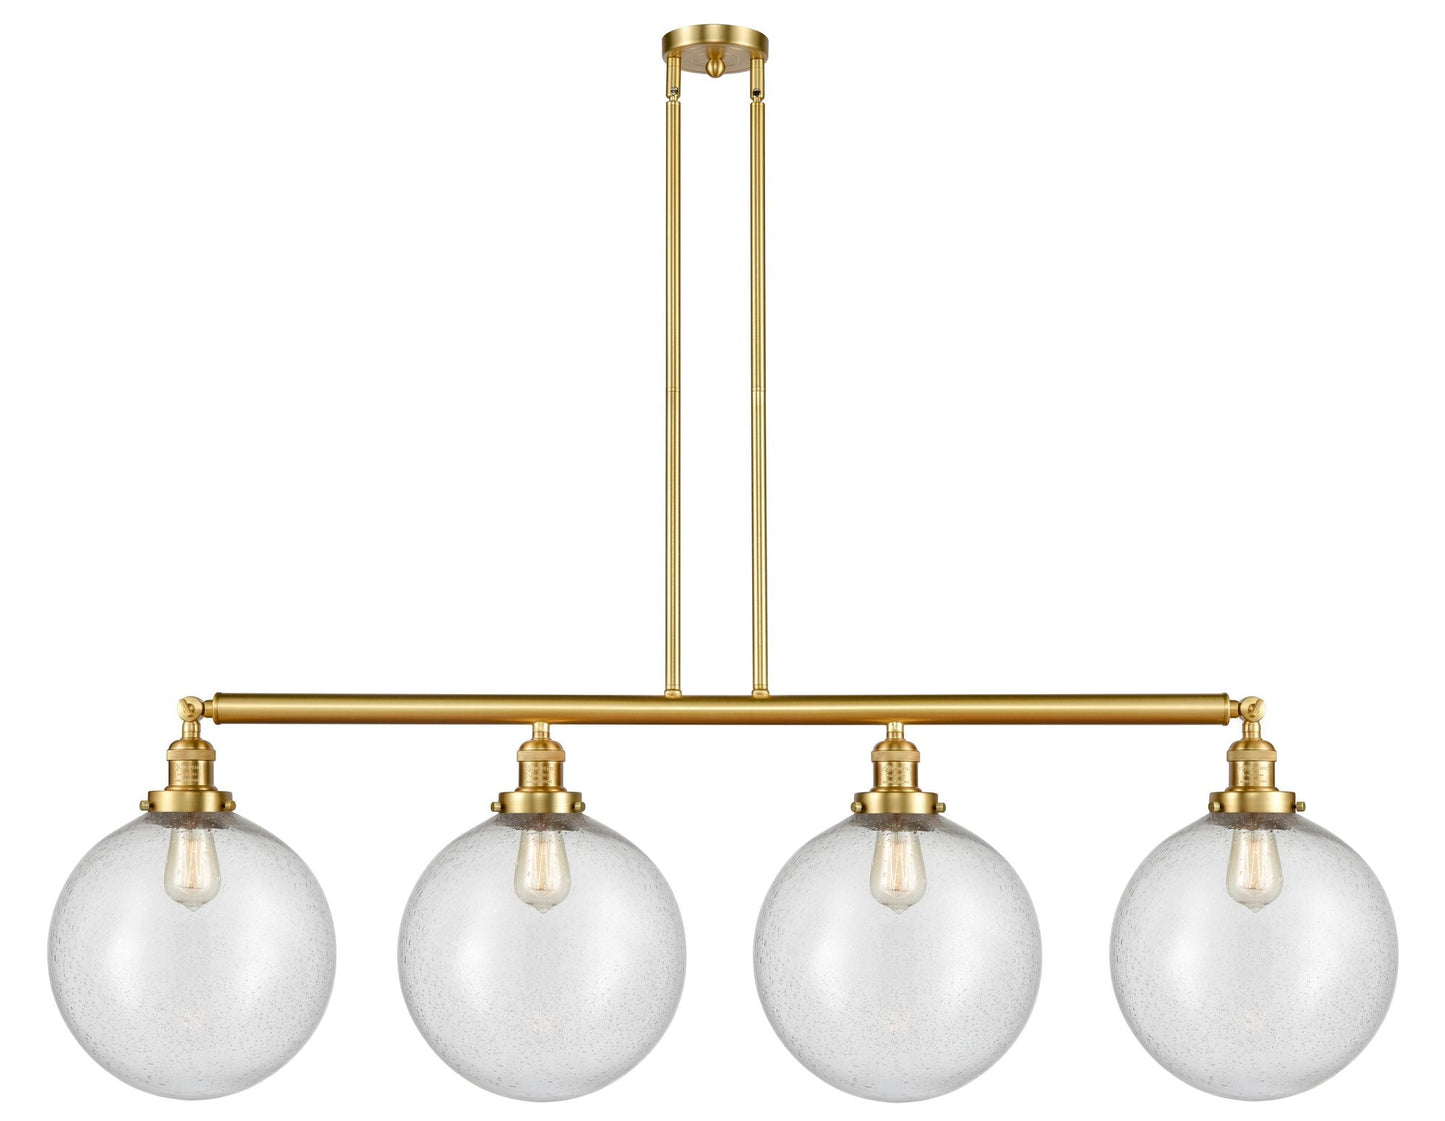 214-SG-G204-12 4-Light 56" Satin Gold Island Light - Seedy Beacon Glass - LED Bulb - Dimmensions: 56 x 12 x 16<br>Minimum Height : 26<br>Maximum Height : 50 - Sloped Ceiling Compatible: Yes